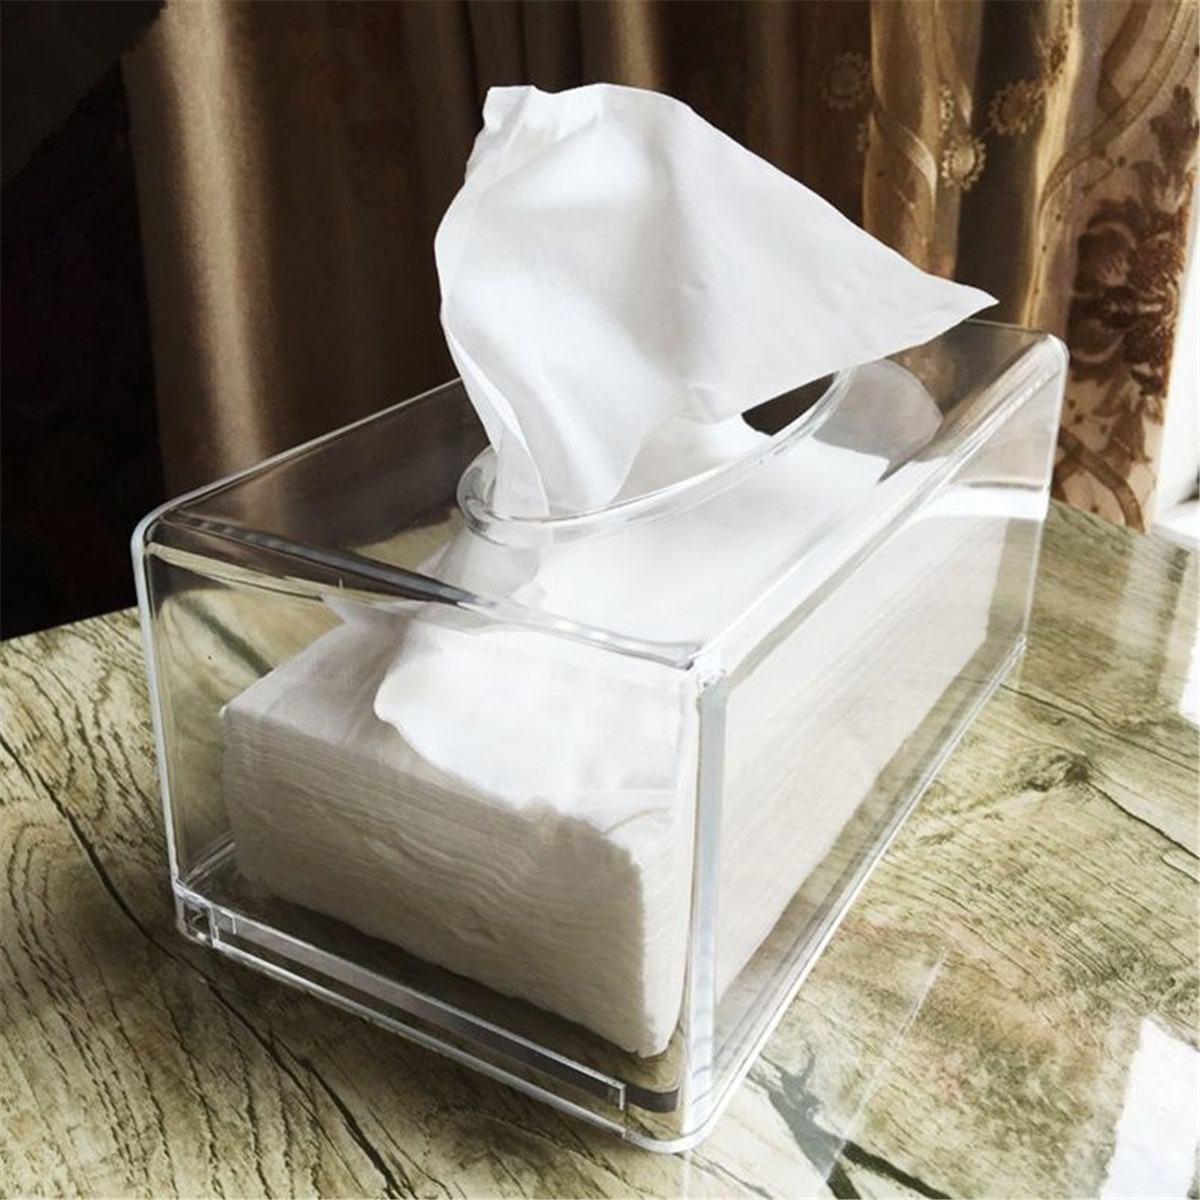 Acrylic Tissue Box with Removable cover - Lunaz Shop